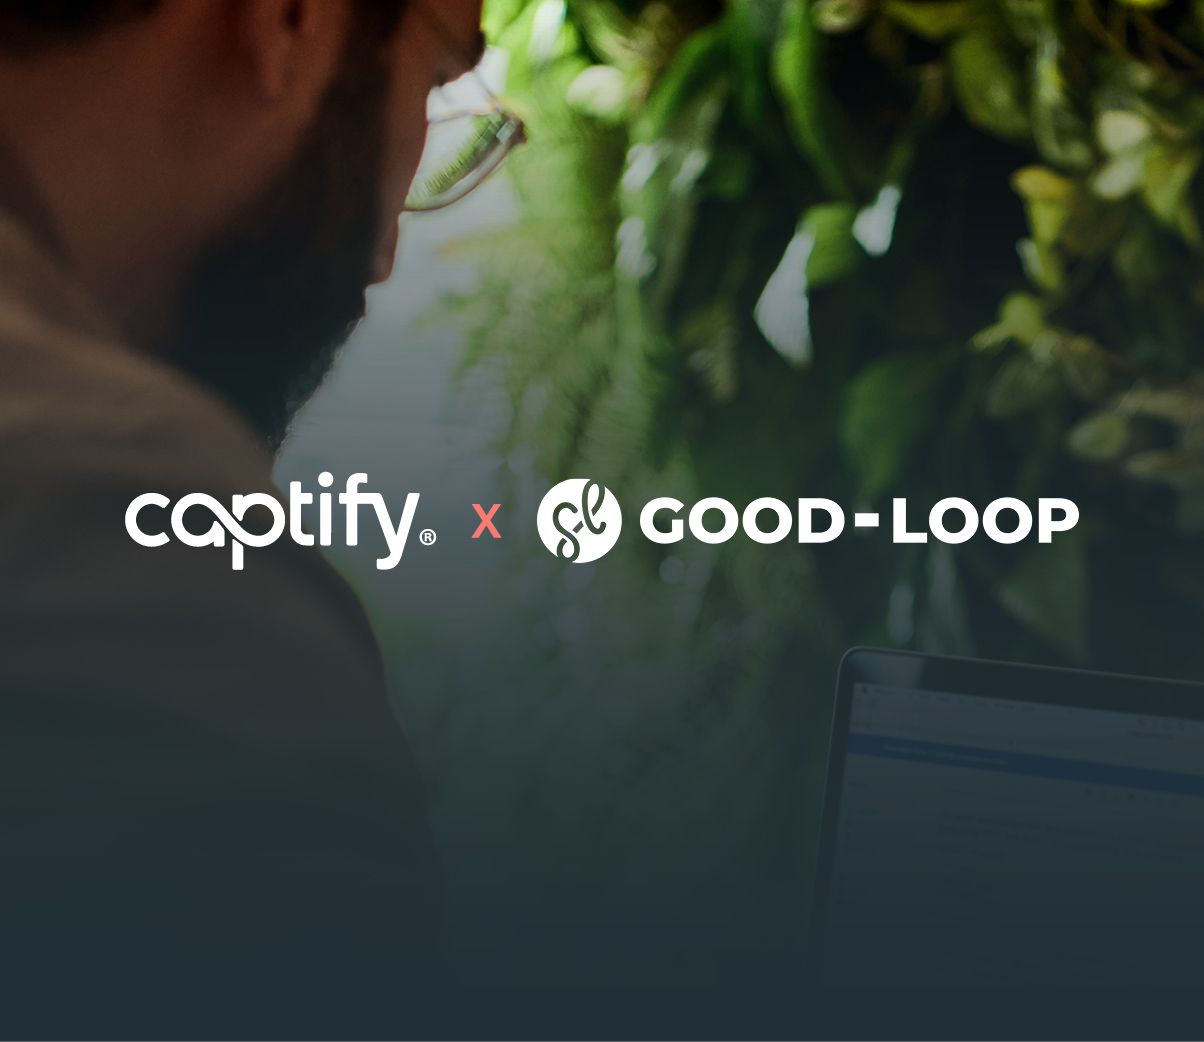 Captify To Track Environmental Impact Of Online Ads Following Global Partnership With Good-Loop